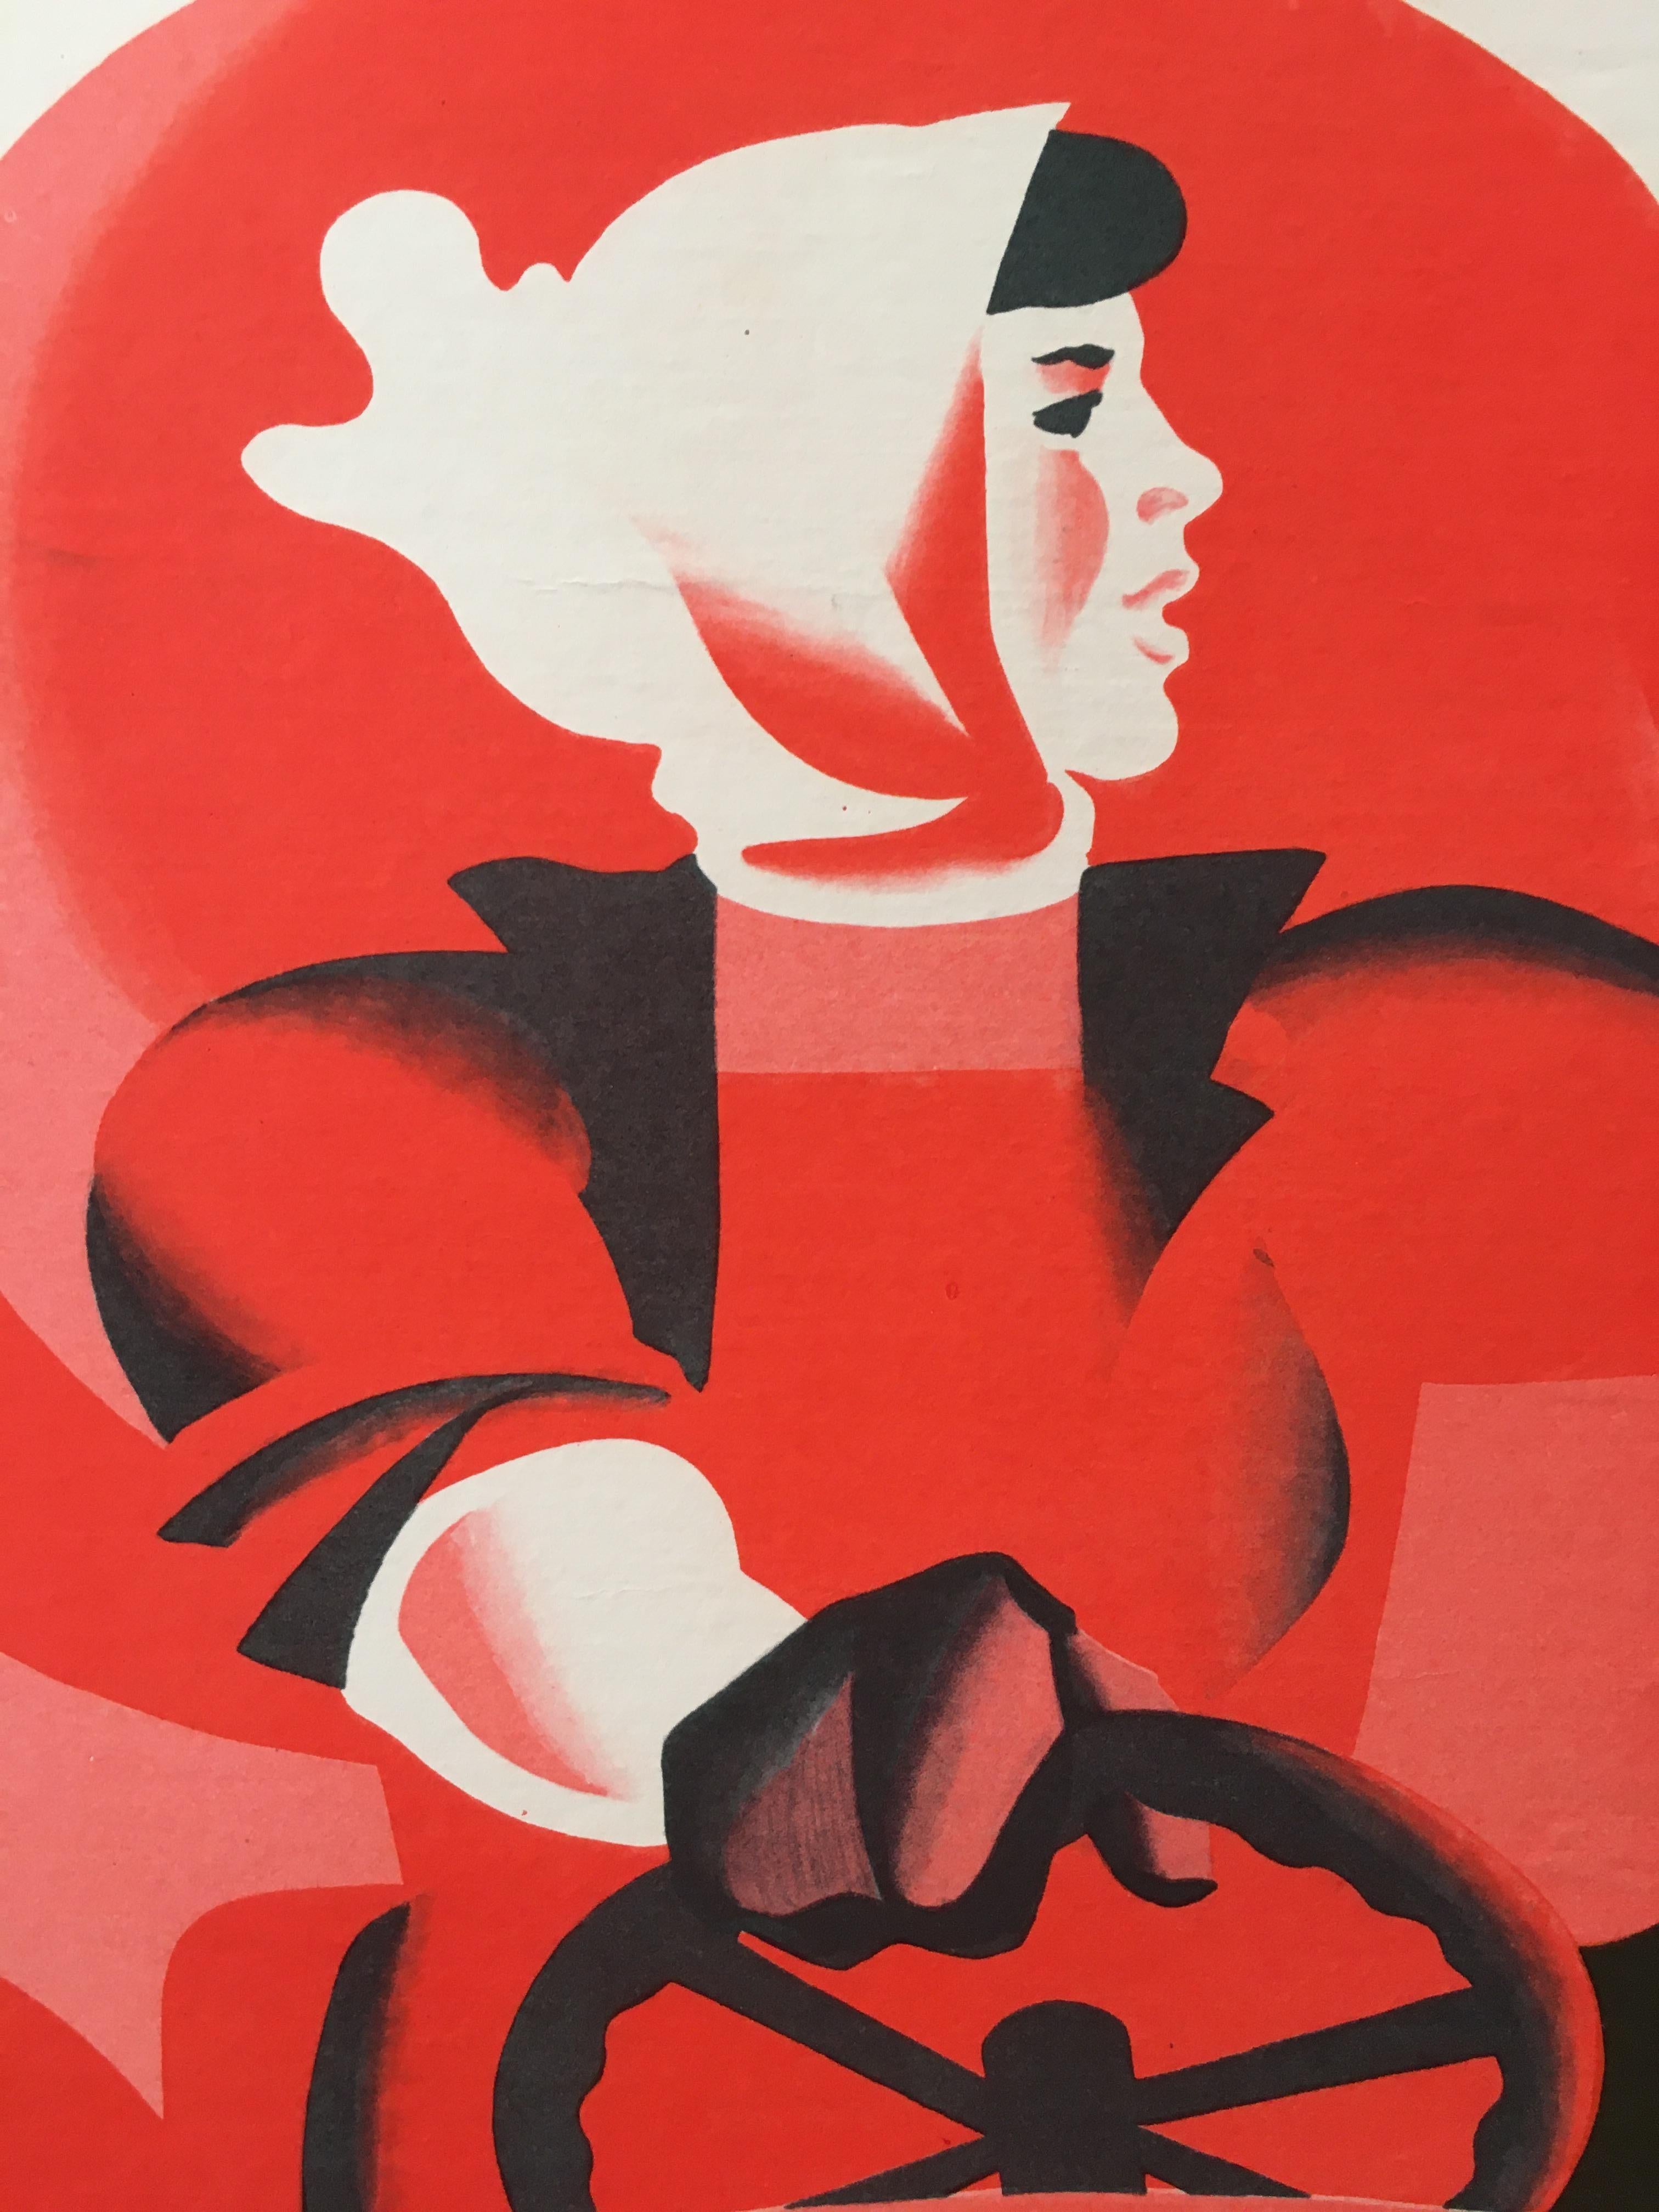 Original Vintage Soviet Union Political Poster 1974 Woman Working on Tractor In Good Condition For Sale In Melbourne, Victoria